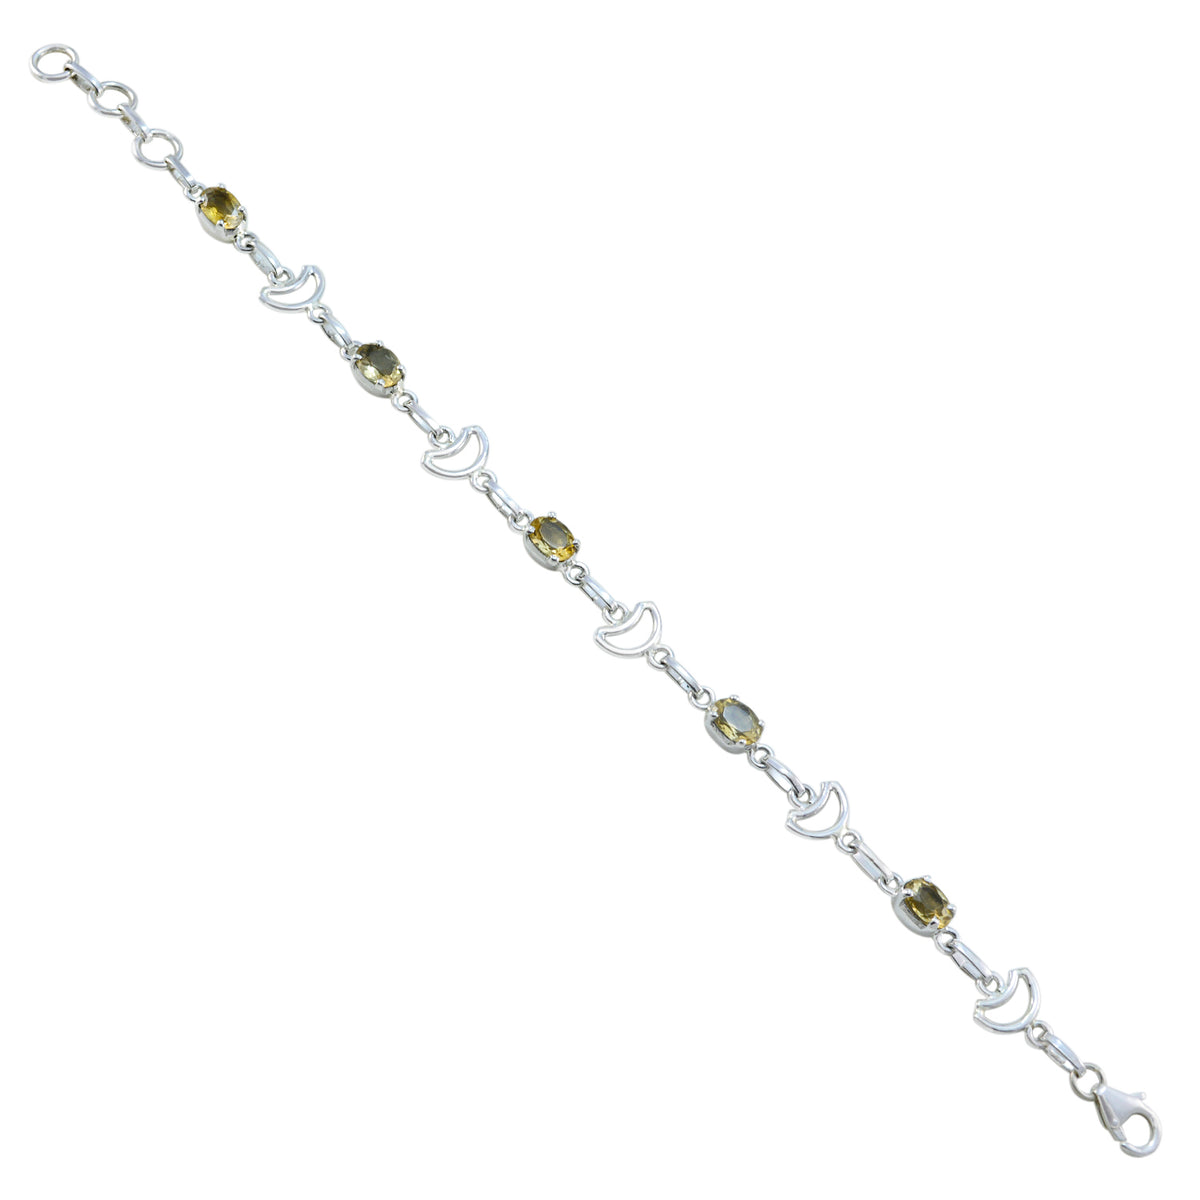 Riyo Nice Gemstone Oval Faceted Yellow Citrine Silver Bracelet gift for good